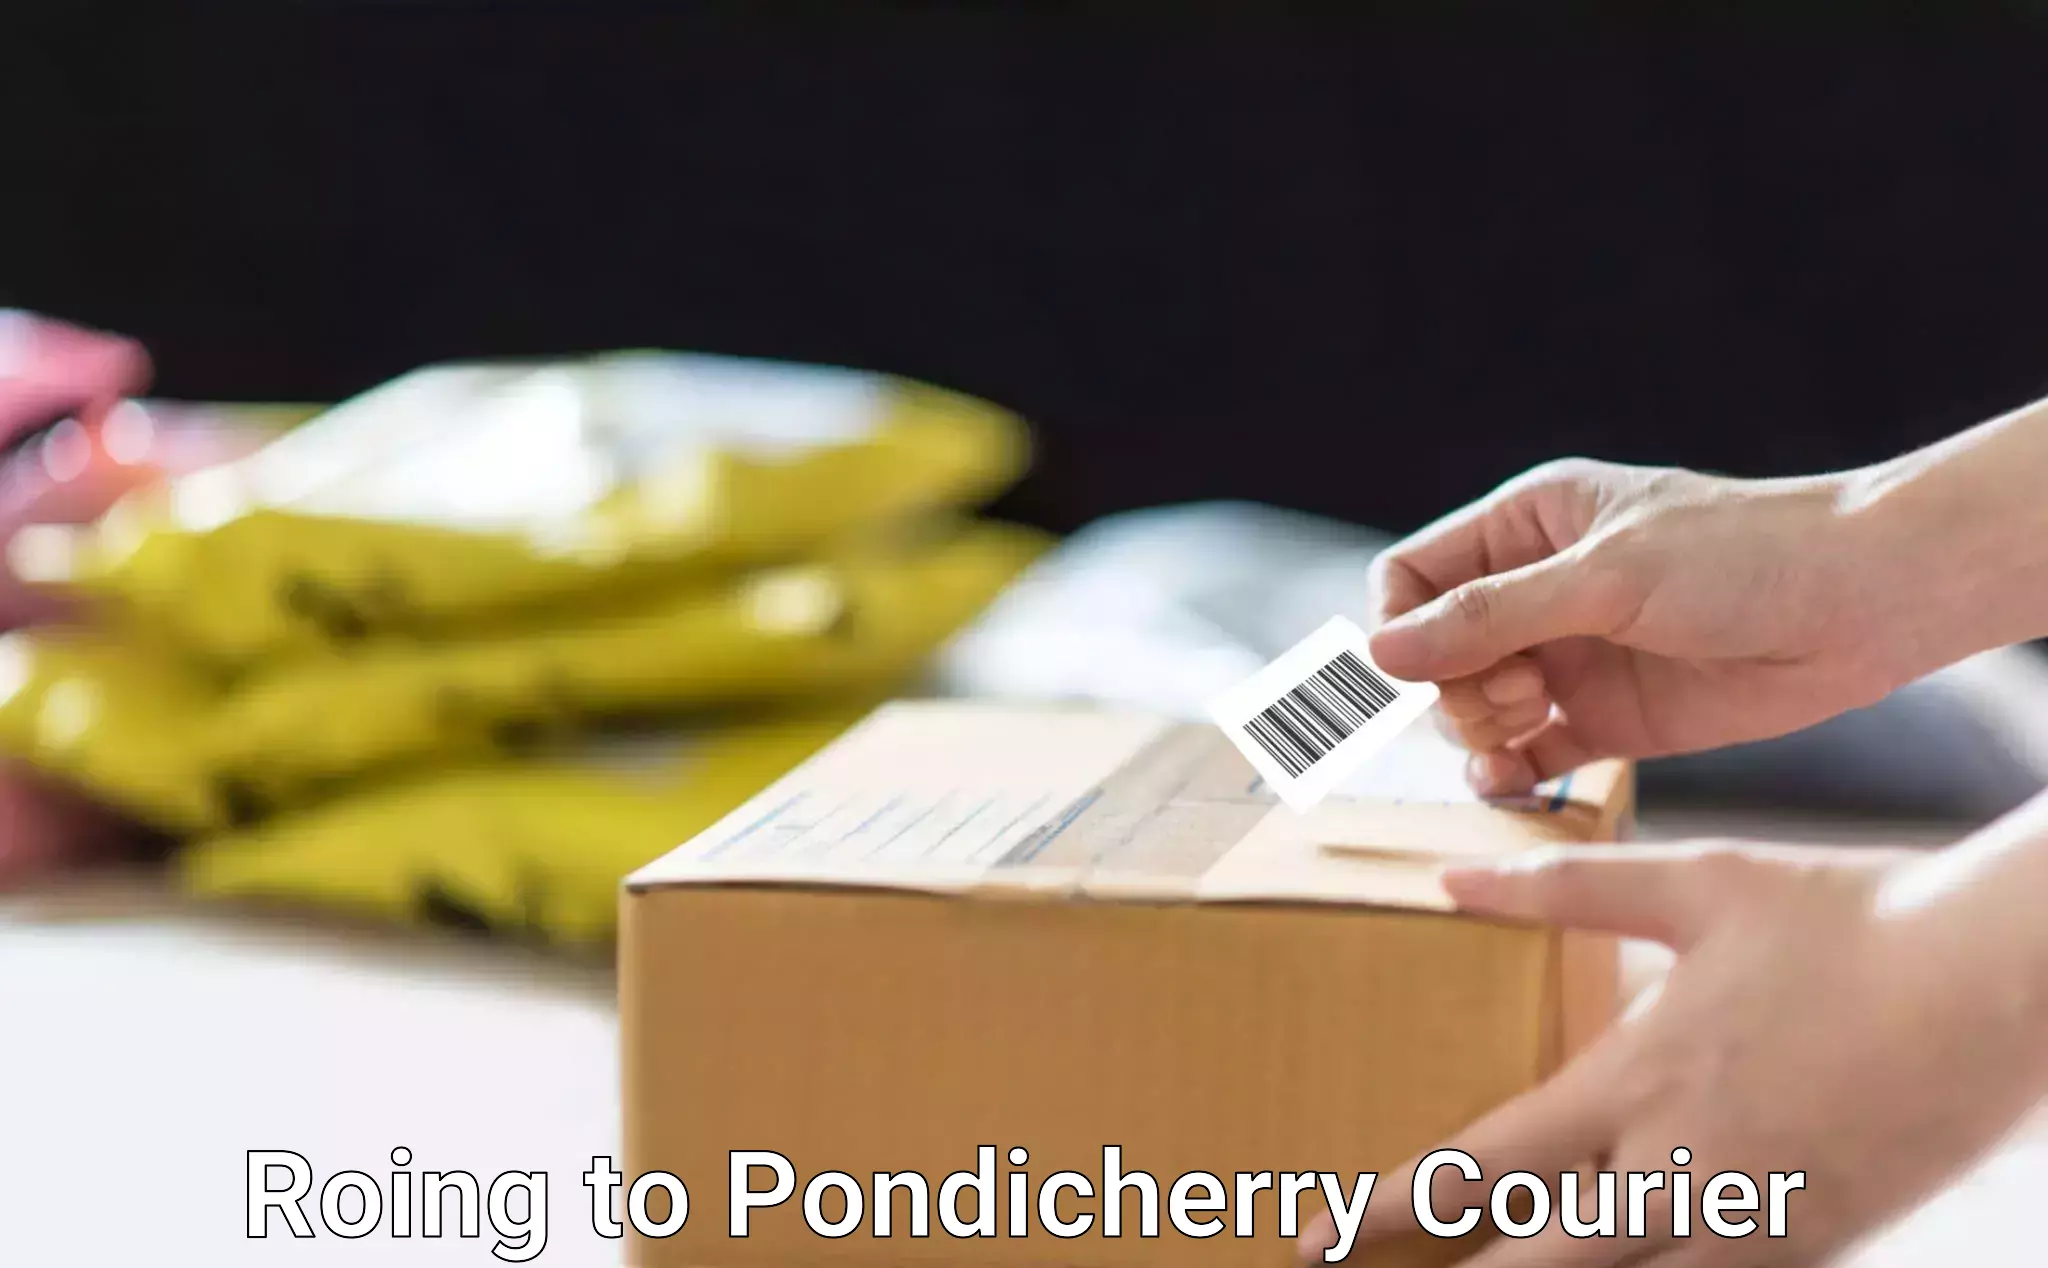 State-of-the-art courier technology Roing to Pondicherry